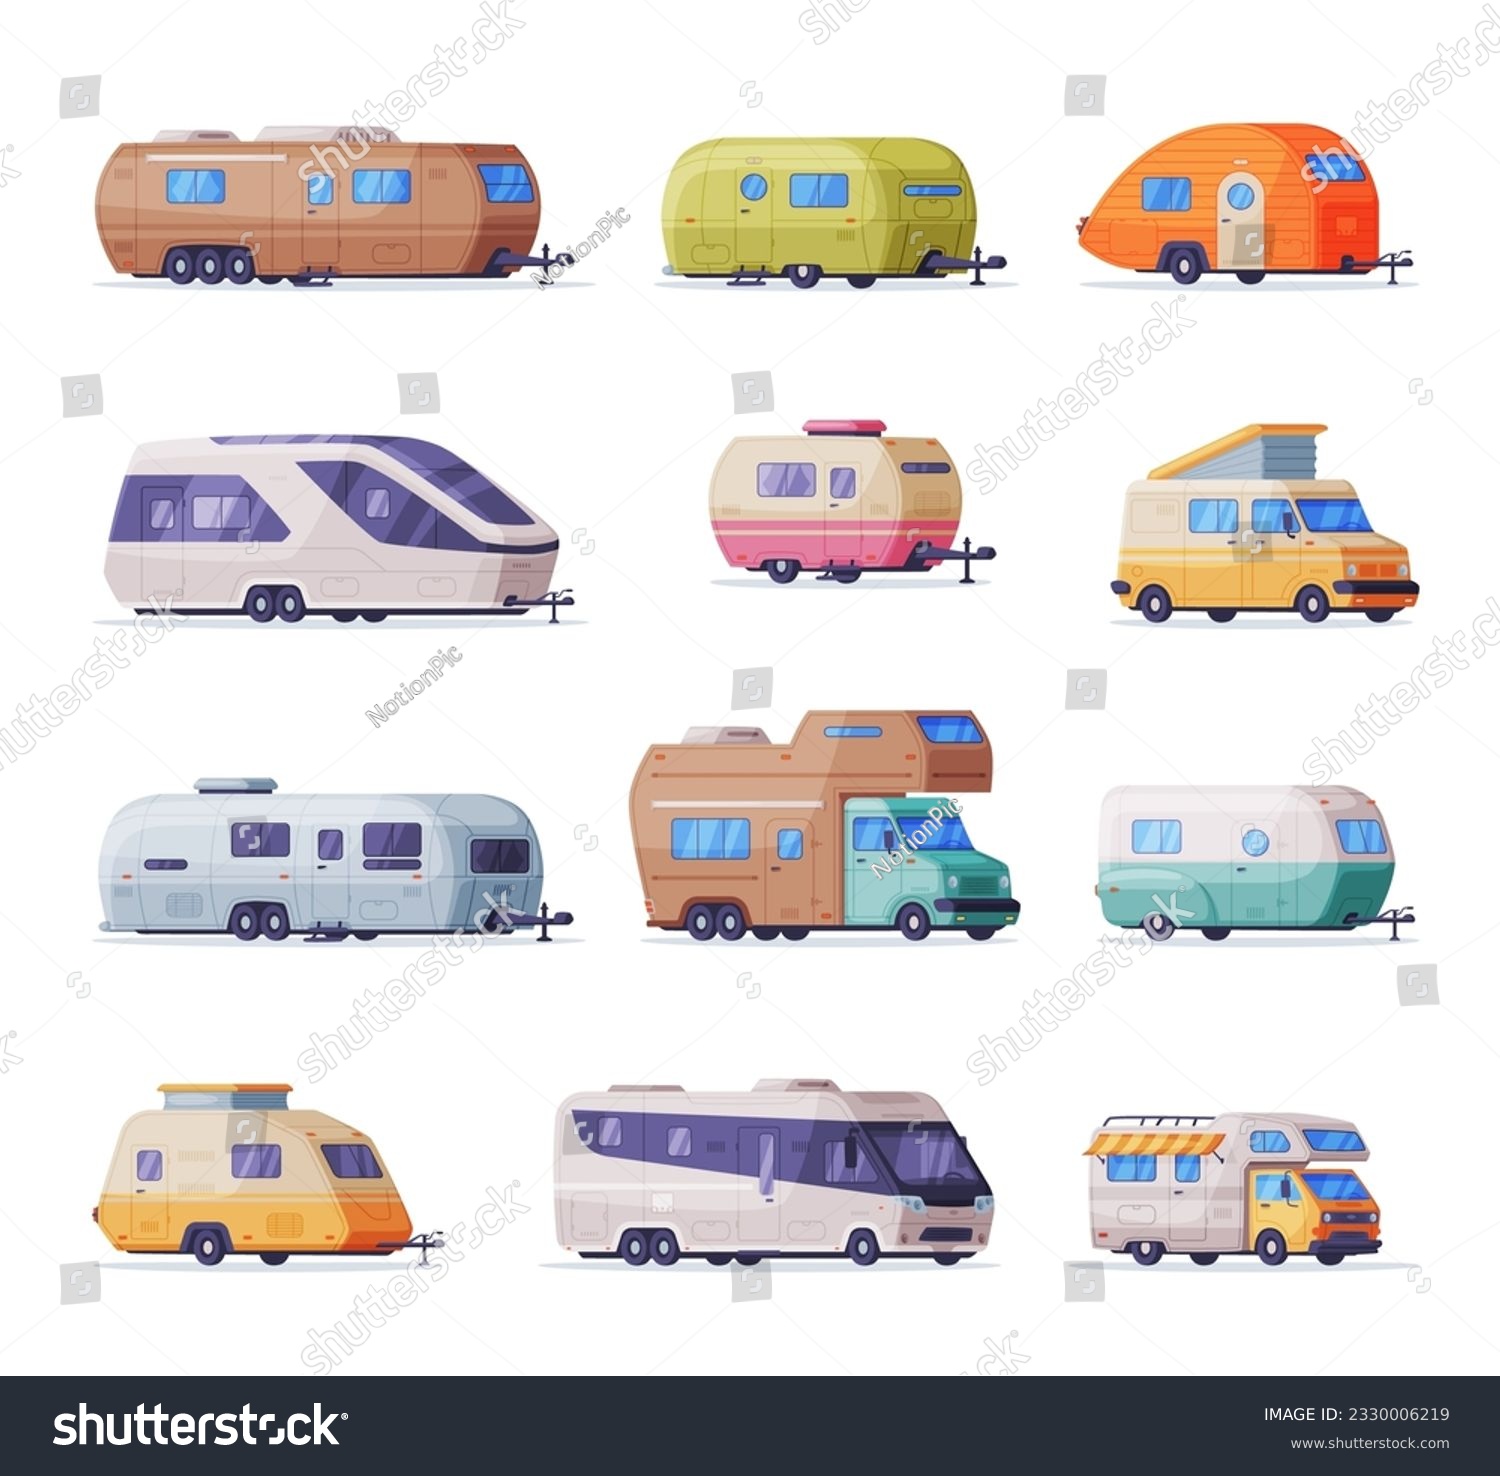 SVG of Mobile houses on wheels set. Side view of family camping recreational vehicles, RV trailers caravans vector illustration svg